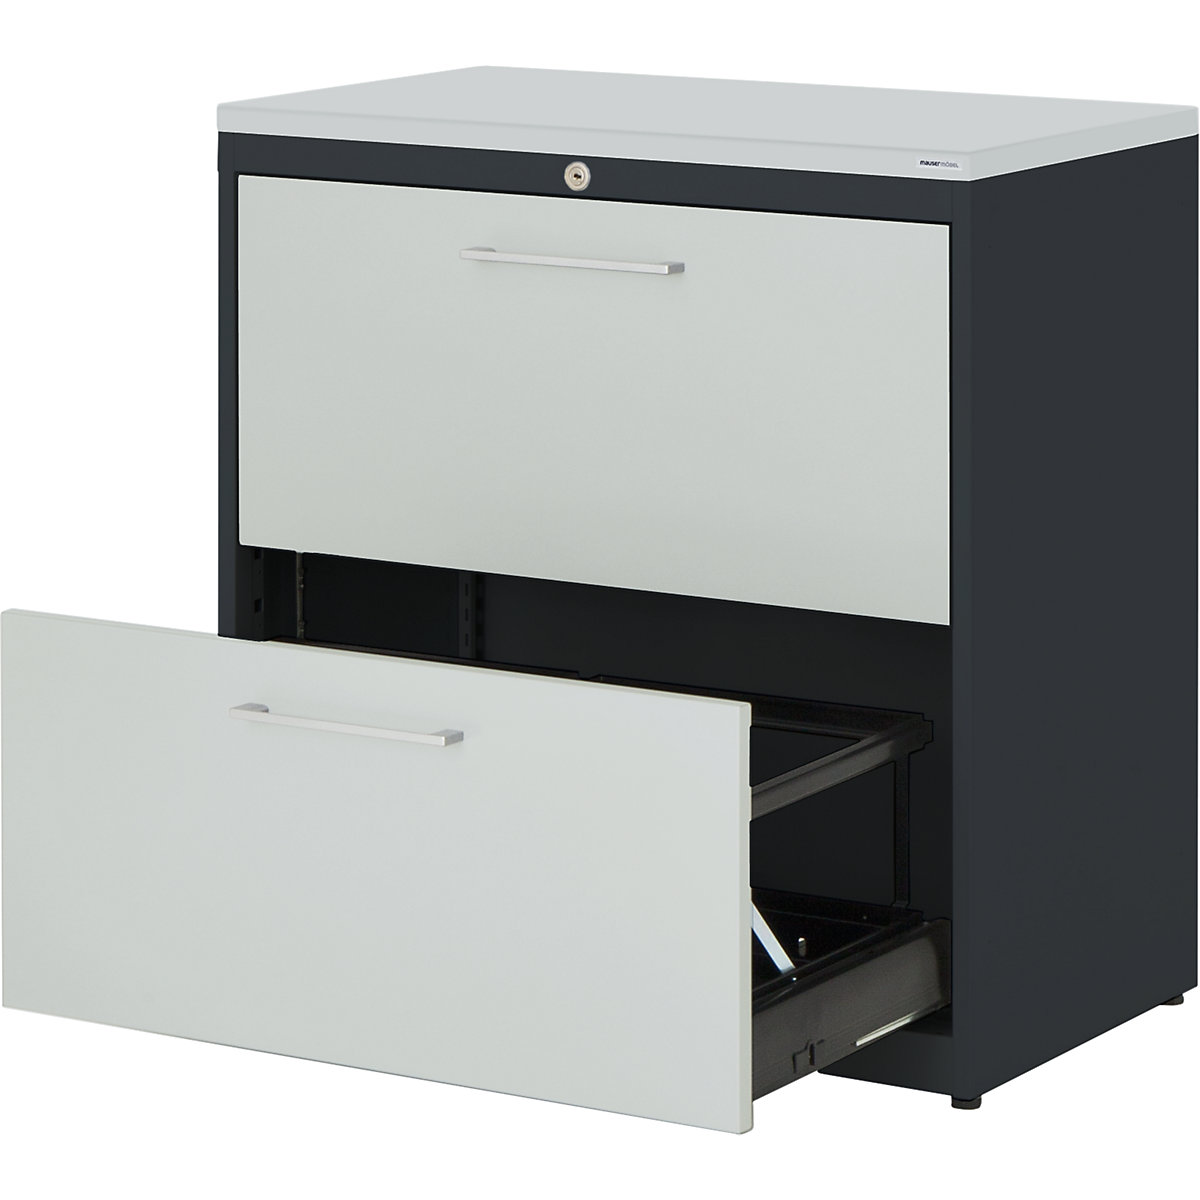 Suspension filing cabinet – mauser, plastic panel, 2 drawers, 2 tracks, with dampers, charcoal / light grey / light grey-3